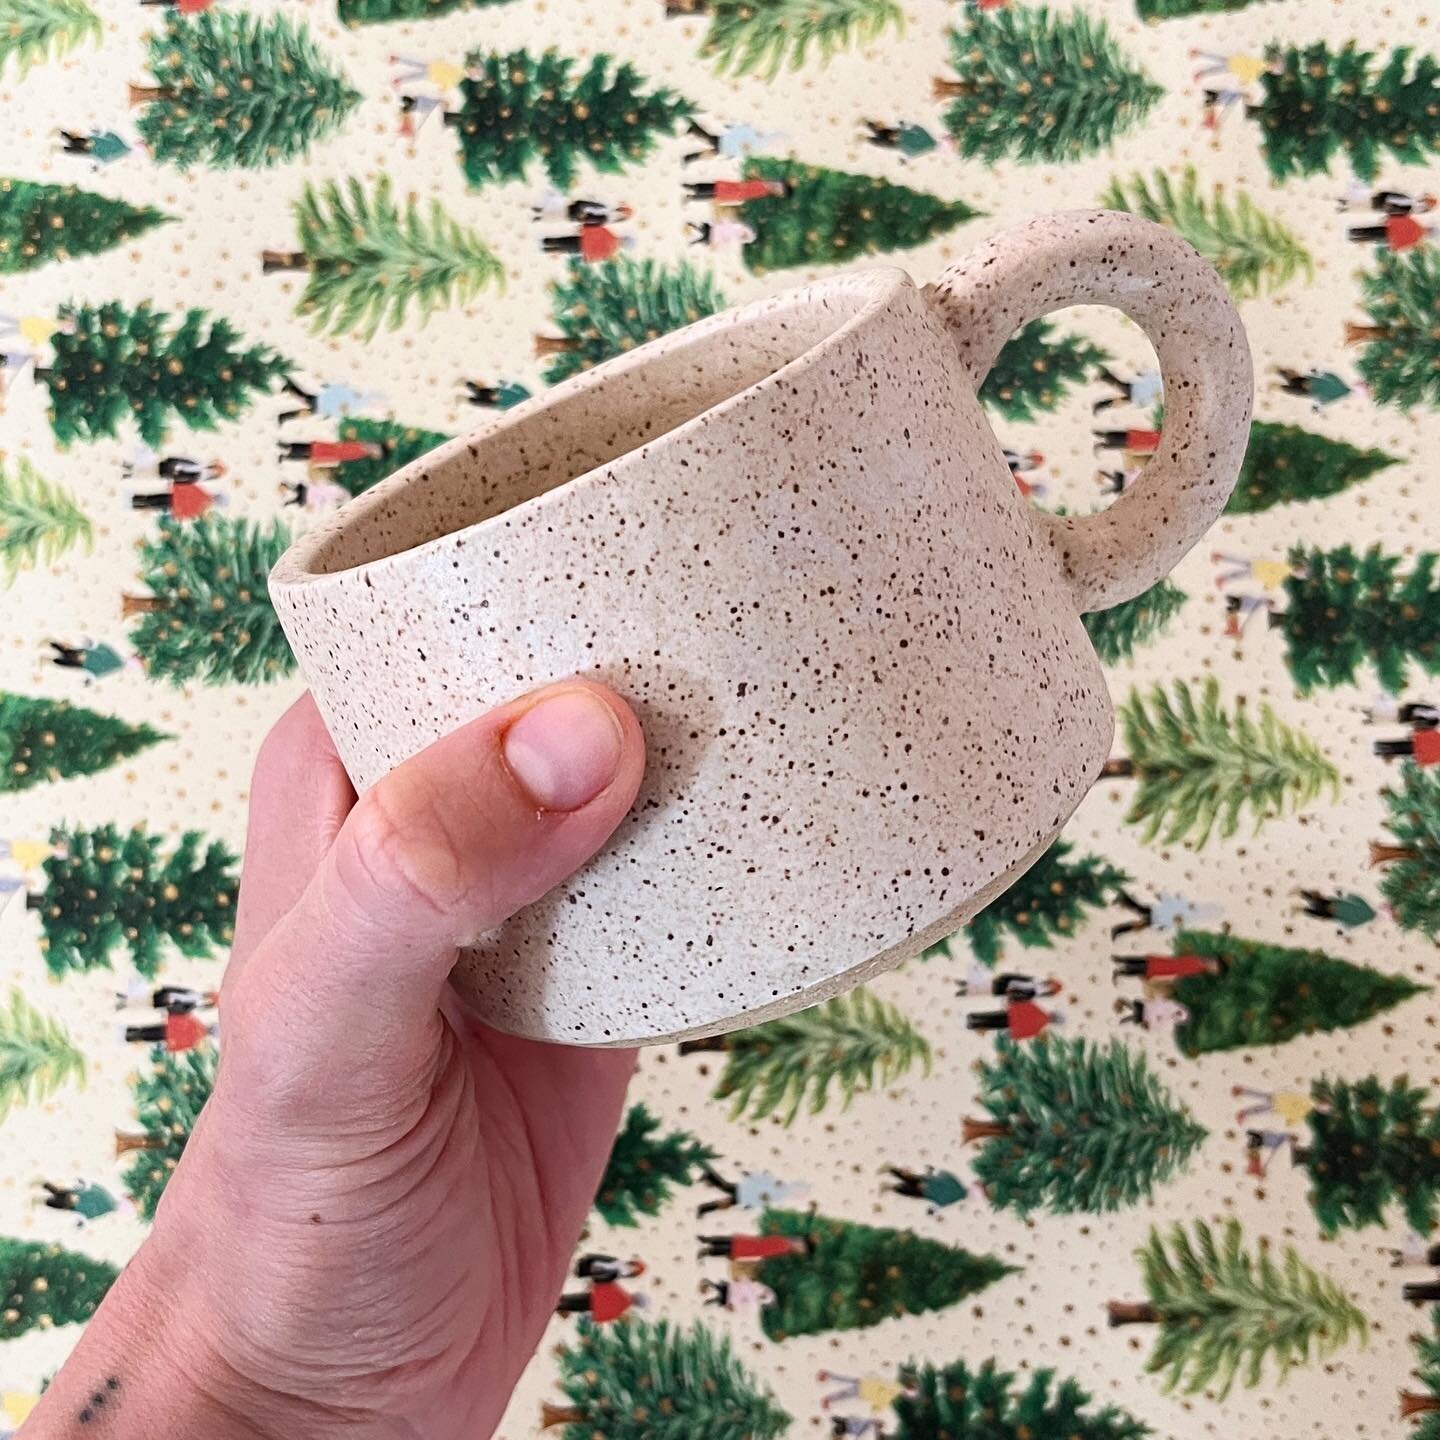 every year I make a special batch of mugs for the holiday. this year&rsquo;s edition is a low mug, with a loop handle, finished with my favorite glaze - sand. 

sadly, I won&rsquo;t be making this glaze for quite some time, since one ingredient is ha